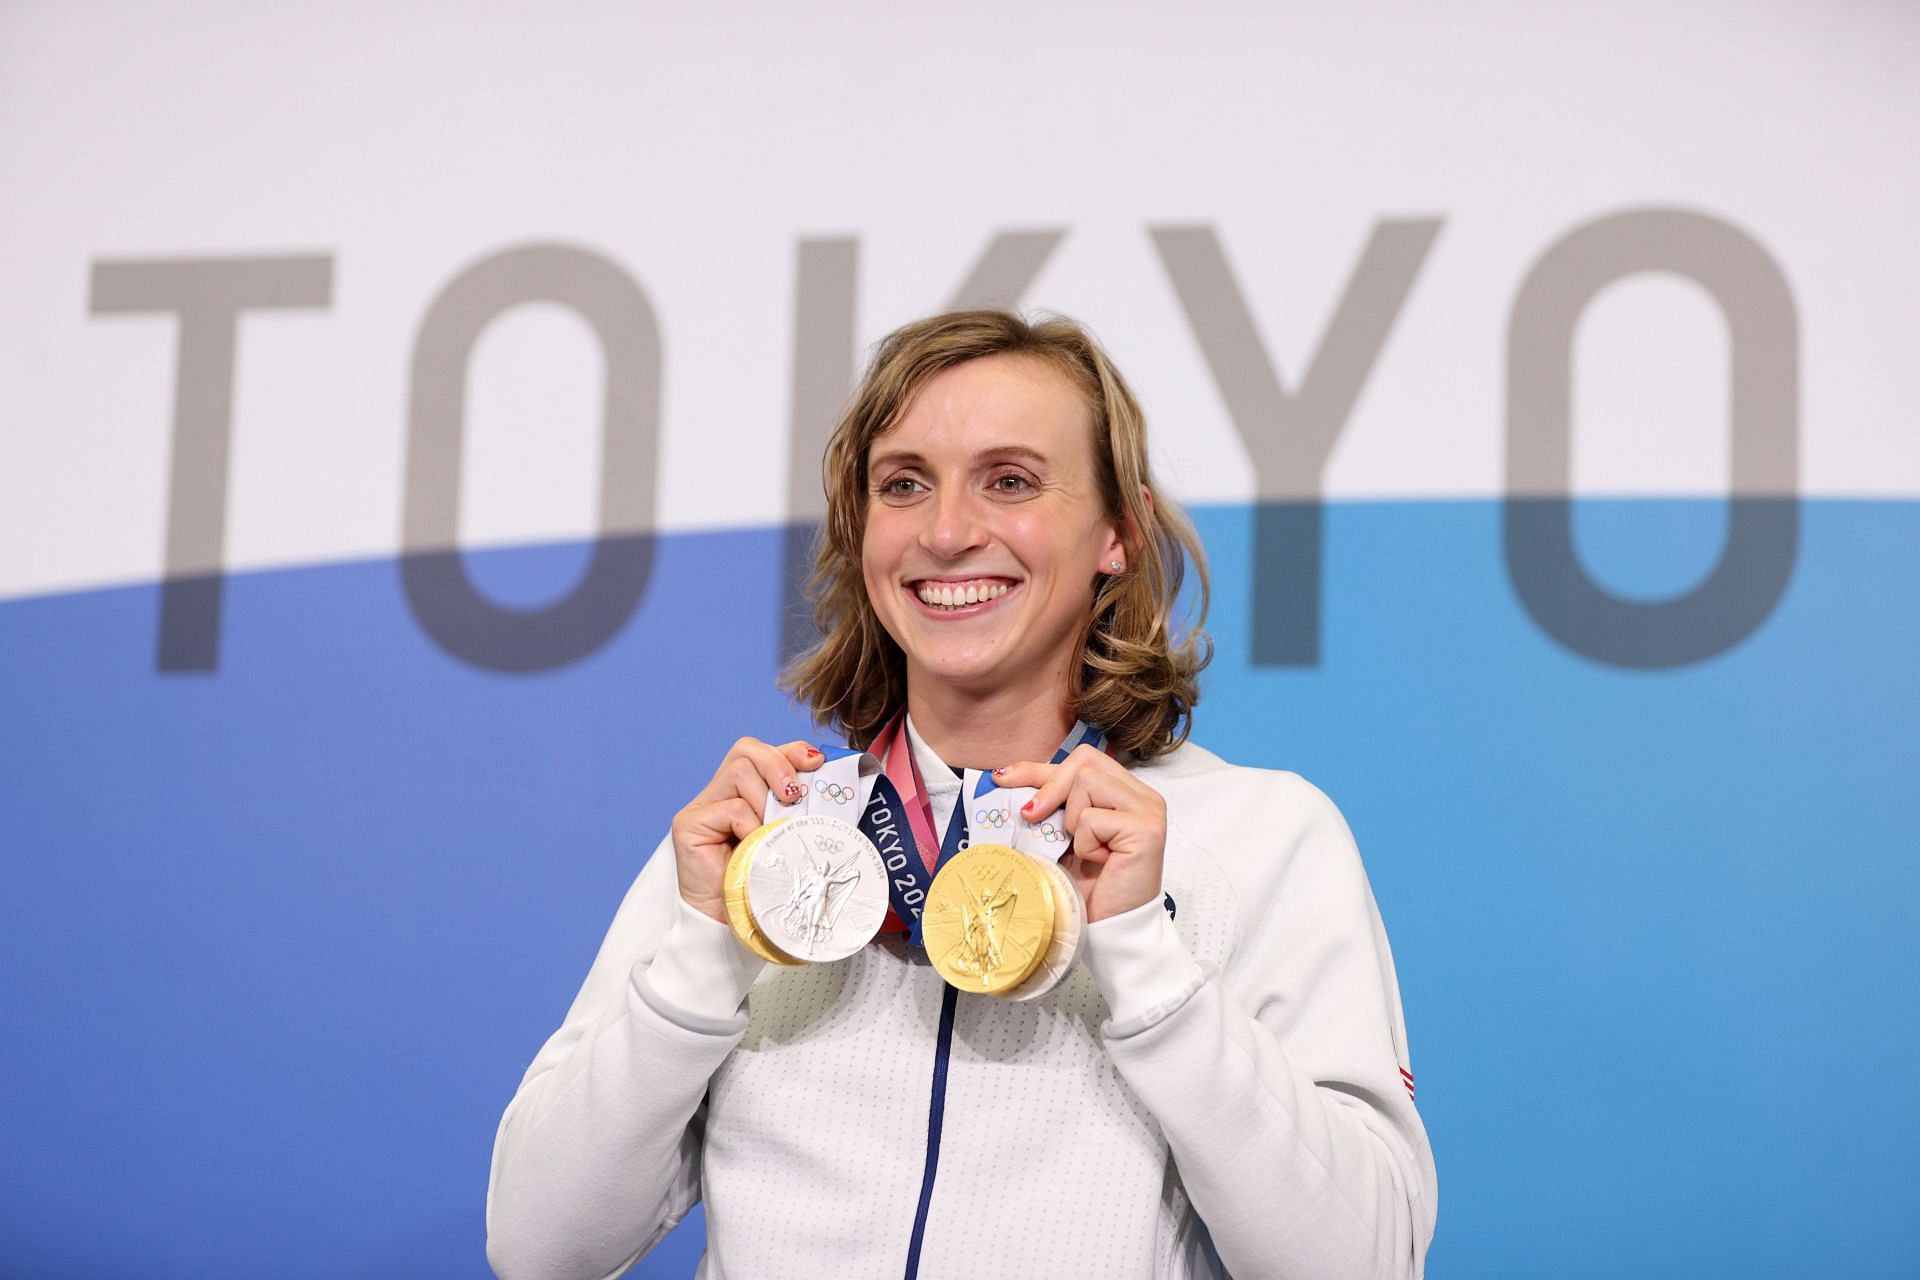 Katie Ledecky has quite a few medals at the Olympic Games (Image via Getty)